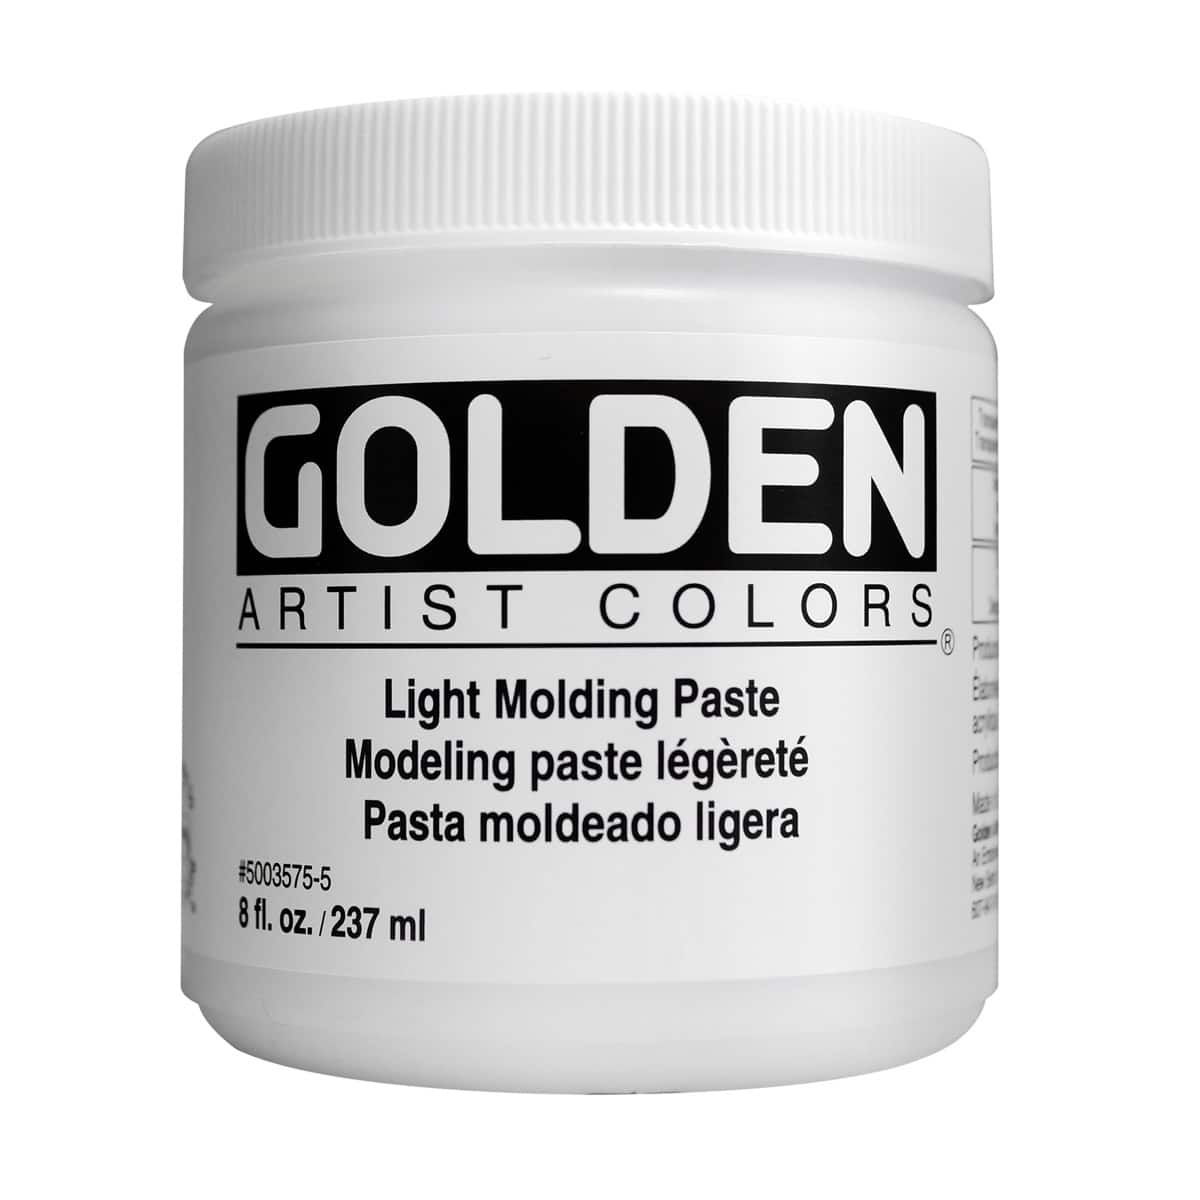 Molding & Modeling Paste Creating Artistic Texture